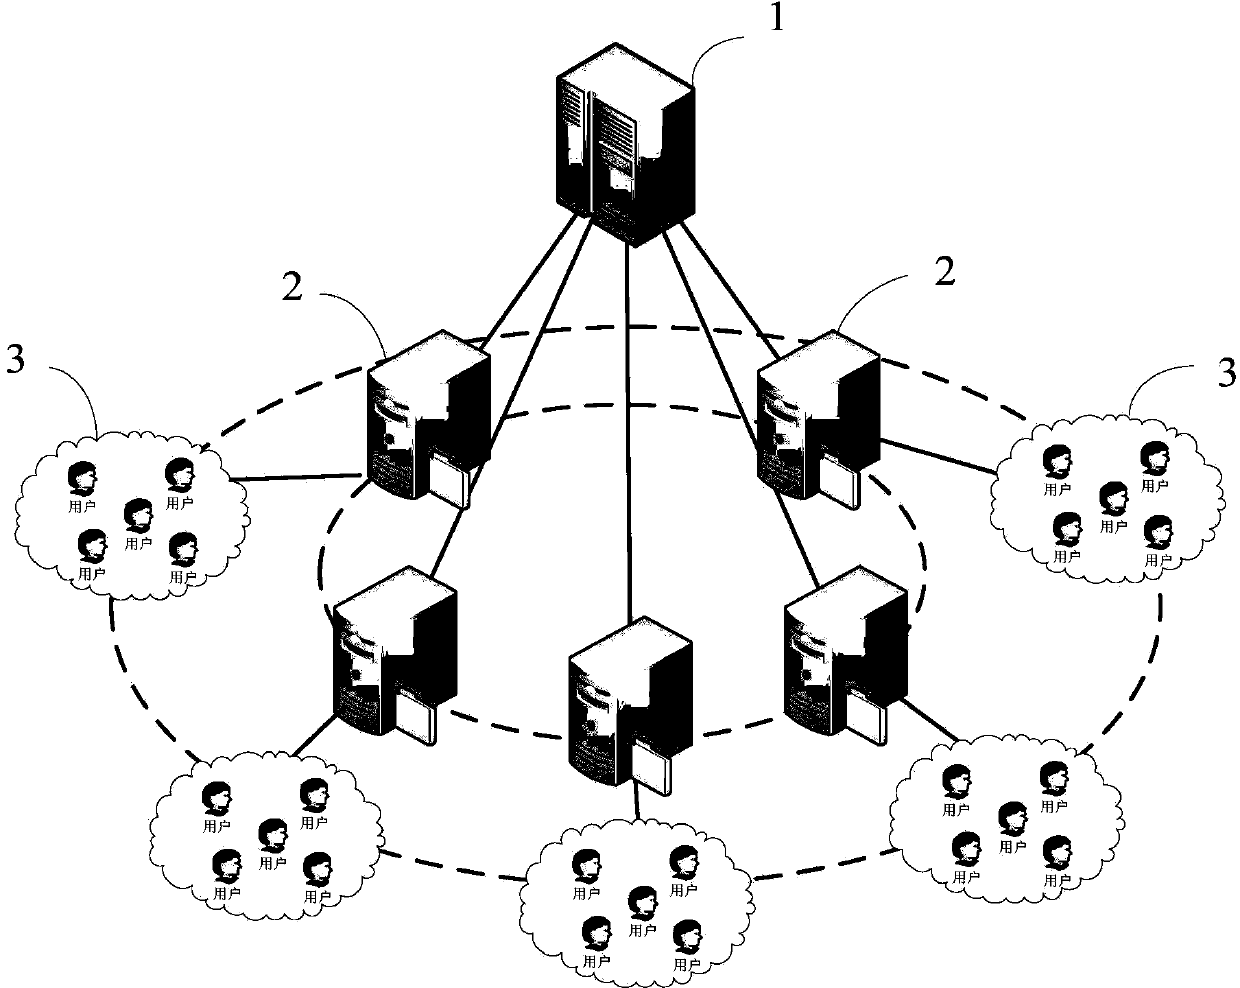 Content distribution method for minimizing cross-domain flows in CDN-P2P fusion network